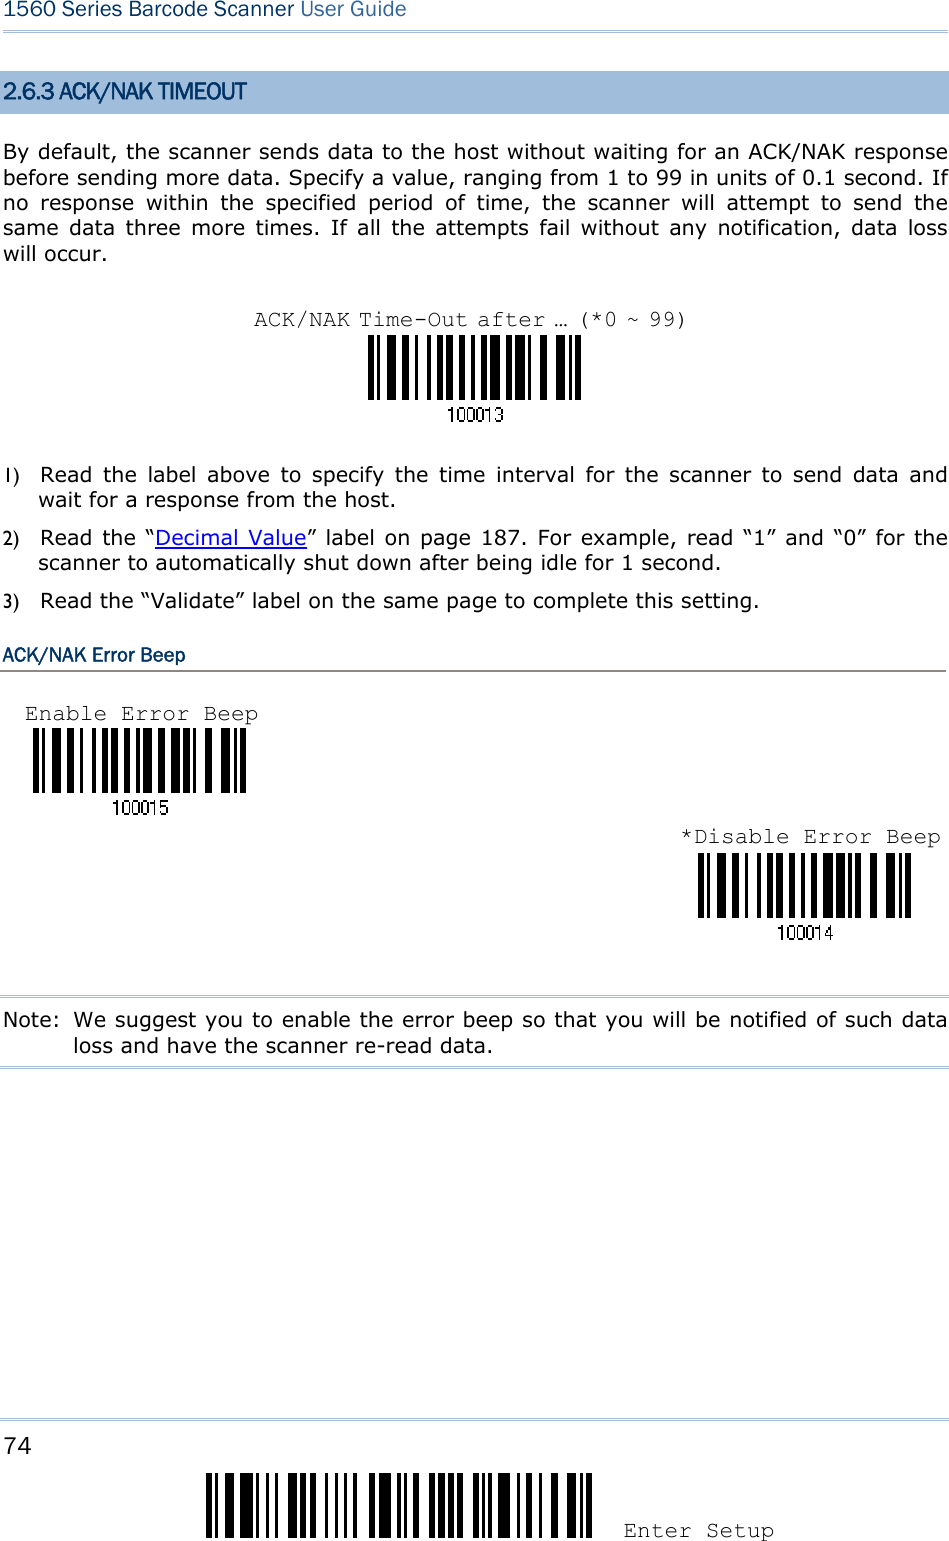 74 Enter Setup 1560 Series Barcode Scanner User Guide  2.6.3 ACK/NAK TIMEOUT By default, the scanner sends data to the host without waiting for an ACK/NAK response before sending more data. Specify a value, ranging from 1 to 99 in units of 0.1 second. If no response within the specified period of time, the scanner will attempt to send the same data three more times. If all the attempts fail without any notification, data loss will occur.    1) Read the label above to specify the time interval for the scanner to send data and wait for a response from the host.             2) Read the “Decimal Value” label on page 187. For example, read “1” and “0” for the scanner to automatically shut down after being idle for 1 second.   3) Read the “Validate” label on the same page to complete this setting. ACK/NAK Error Beep    Note:  We suggest you to enable the error beep so that you will be notified of such data loss and have the scanner re-read data.        ACK/NAK Time-Out after … (*0 ~ 99)Enable Error Beep *Disable Error Beep